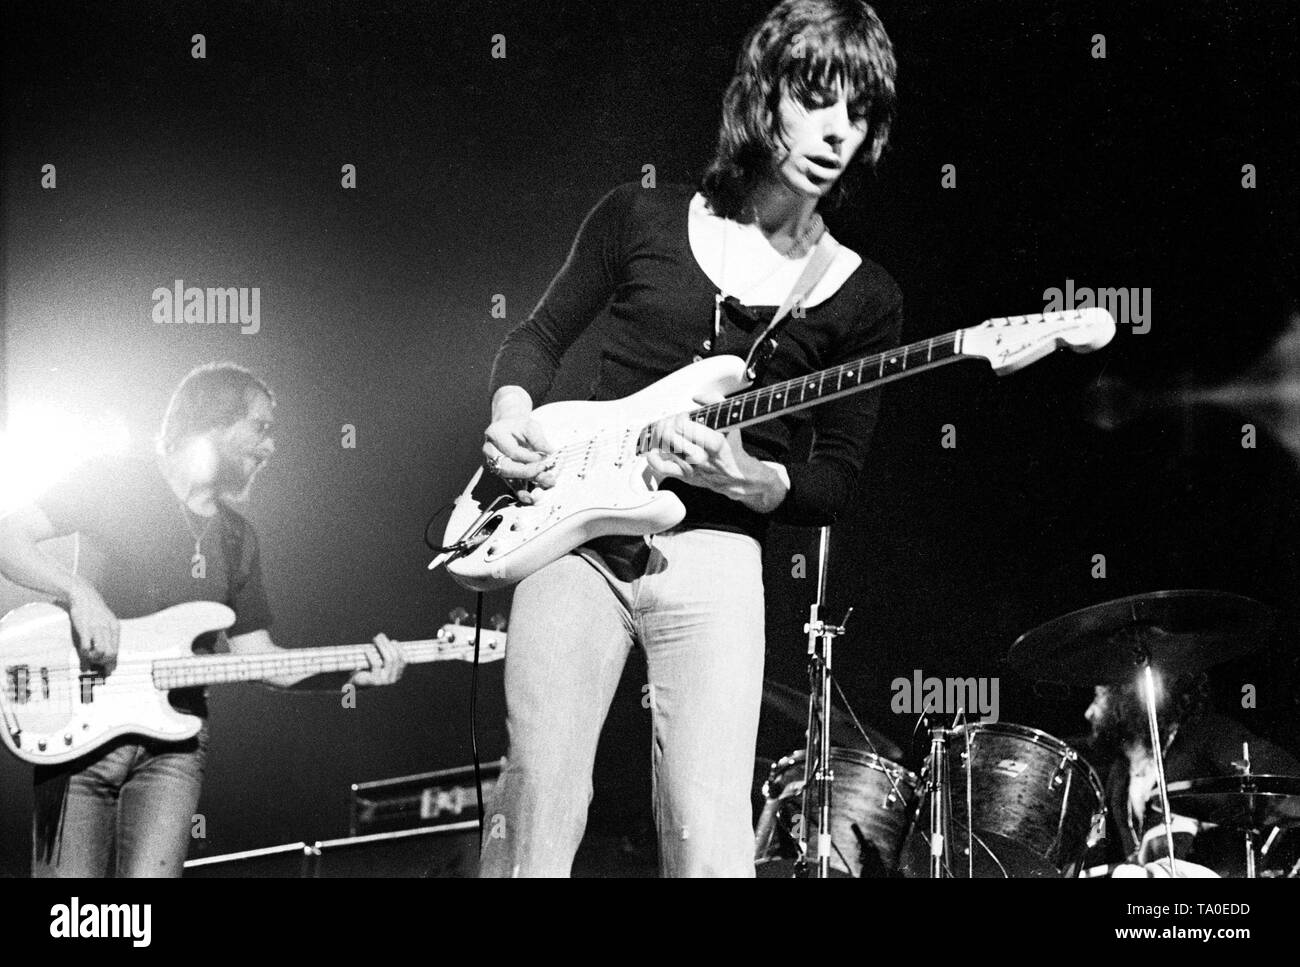 Jeff beck 1972 Black and White Stock Photos & Images - Alamy